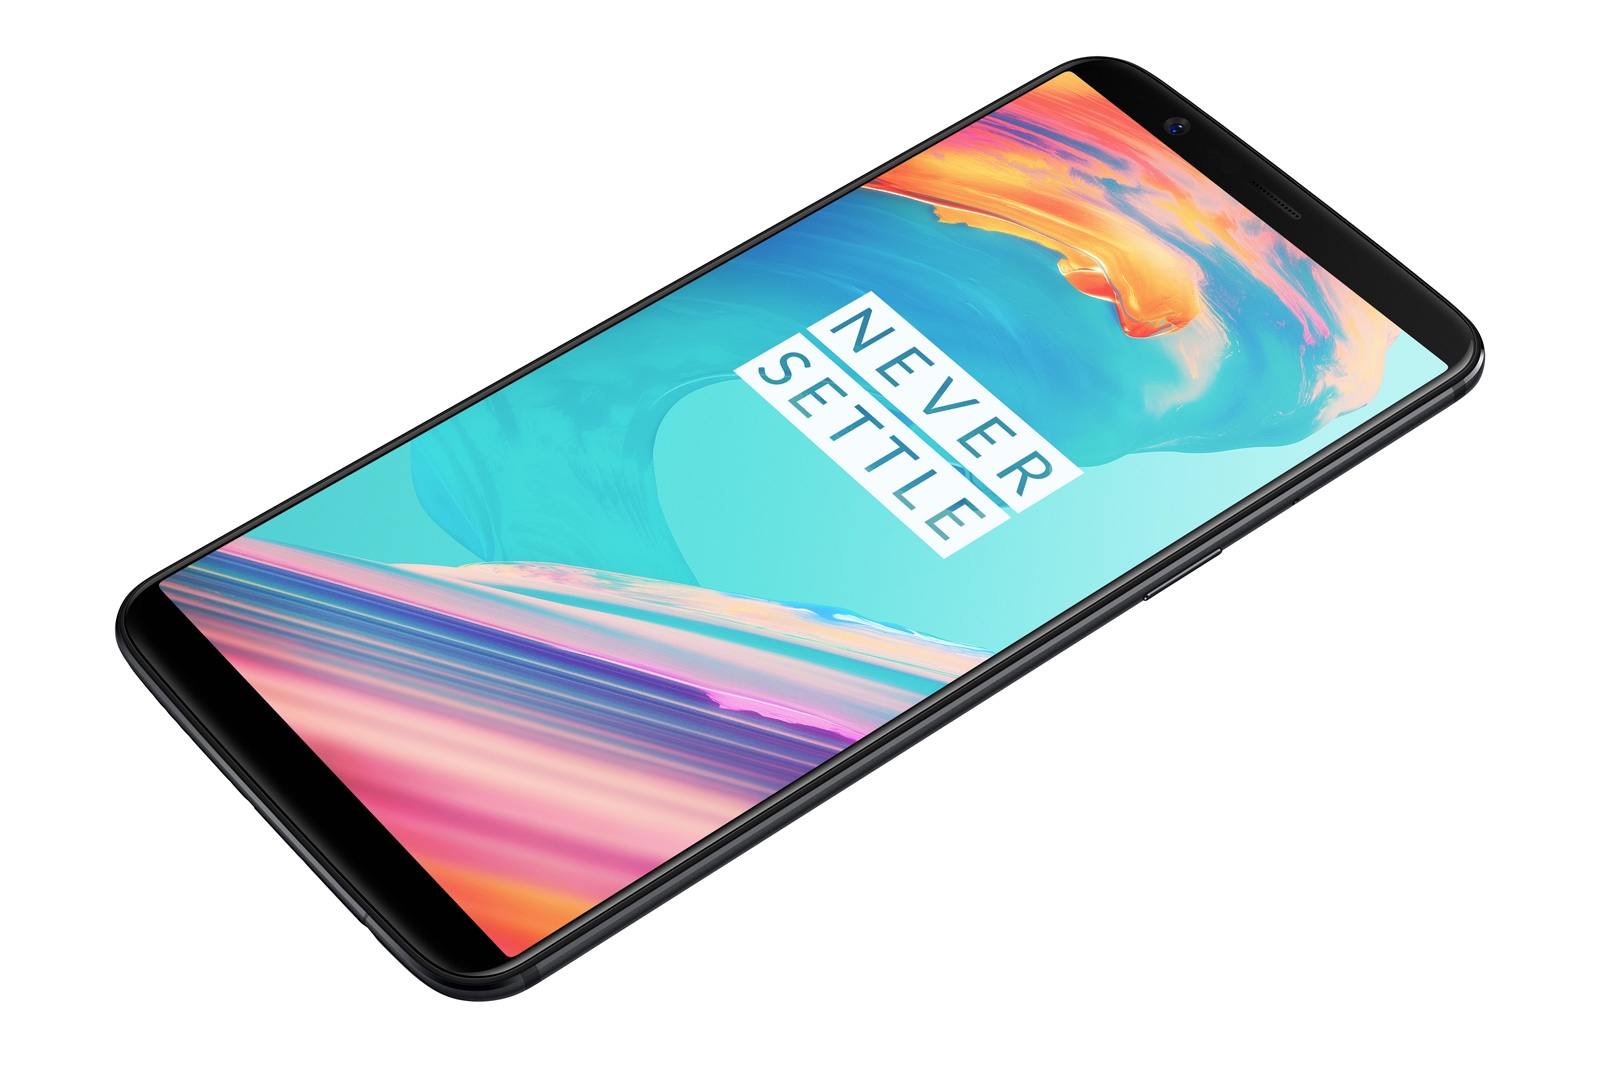 OnePlus 5T packs a tall screen and upgraded dual cameras for $499 | DeviceDaily.com